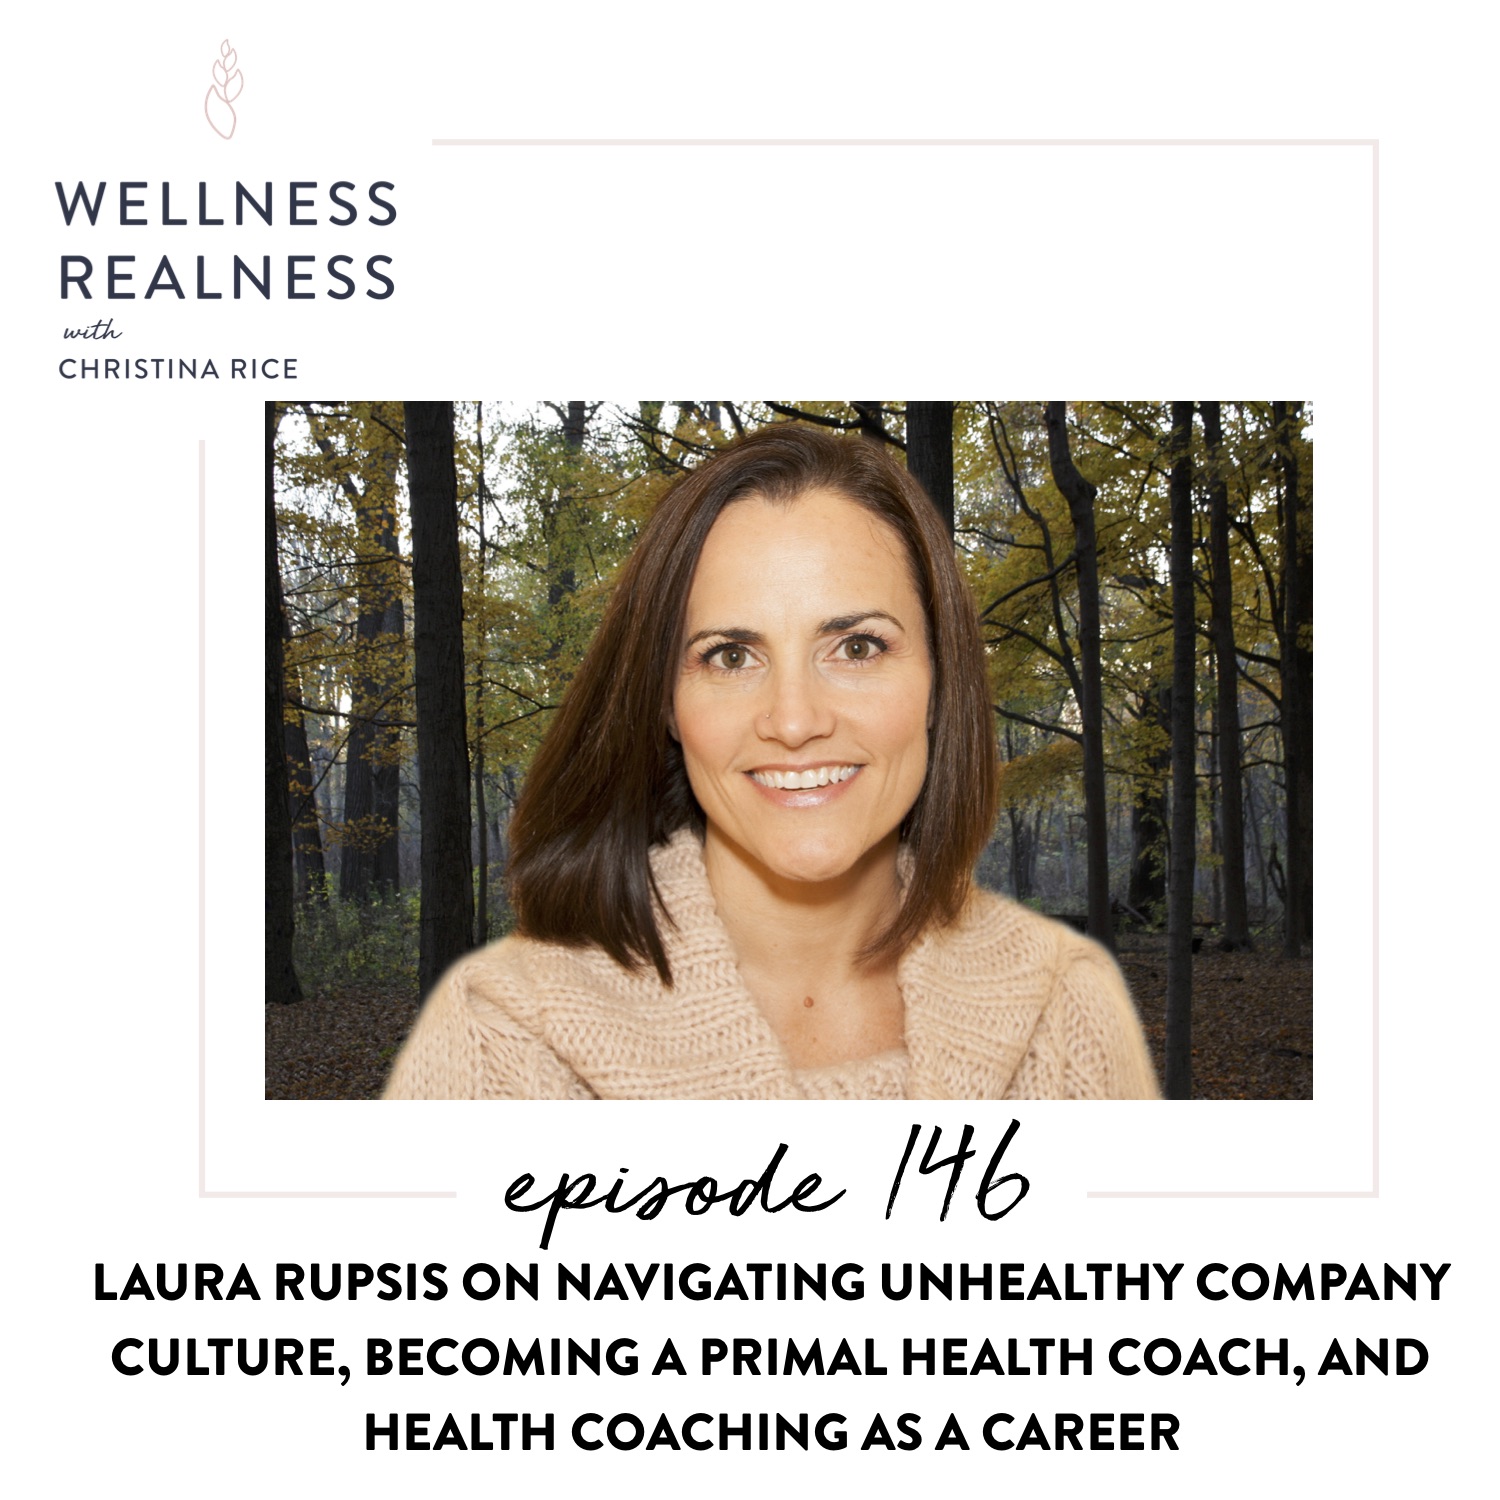 146: Laura Rupsis on Navigating Unhealthy Culture, Becoming a Primal Health Coach, and Health Coaching as a Career